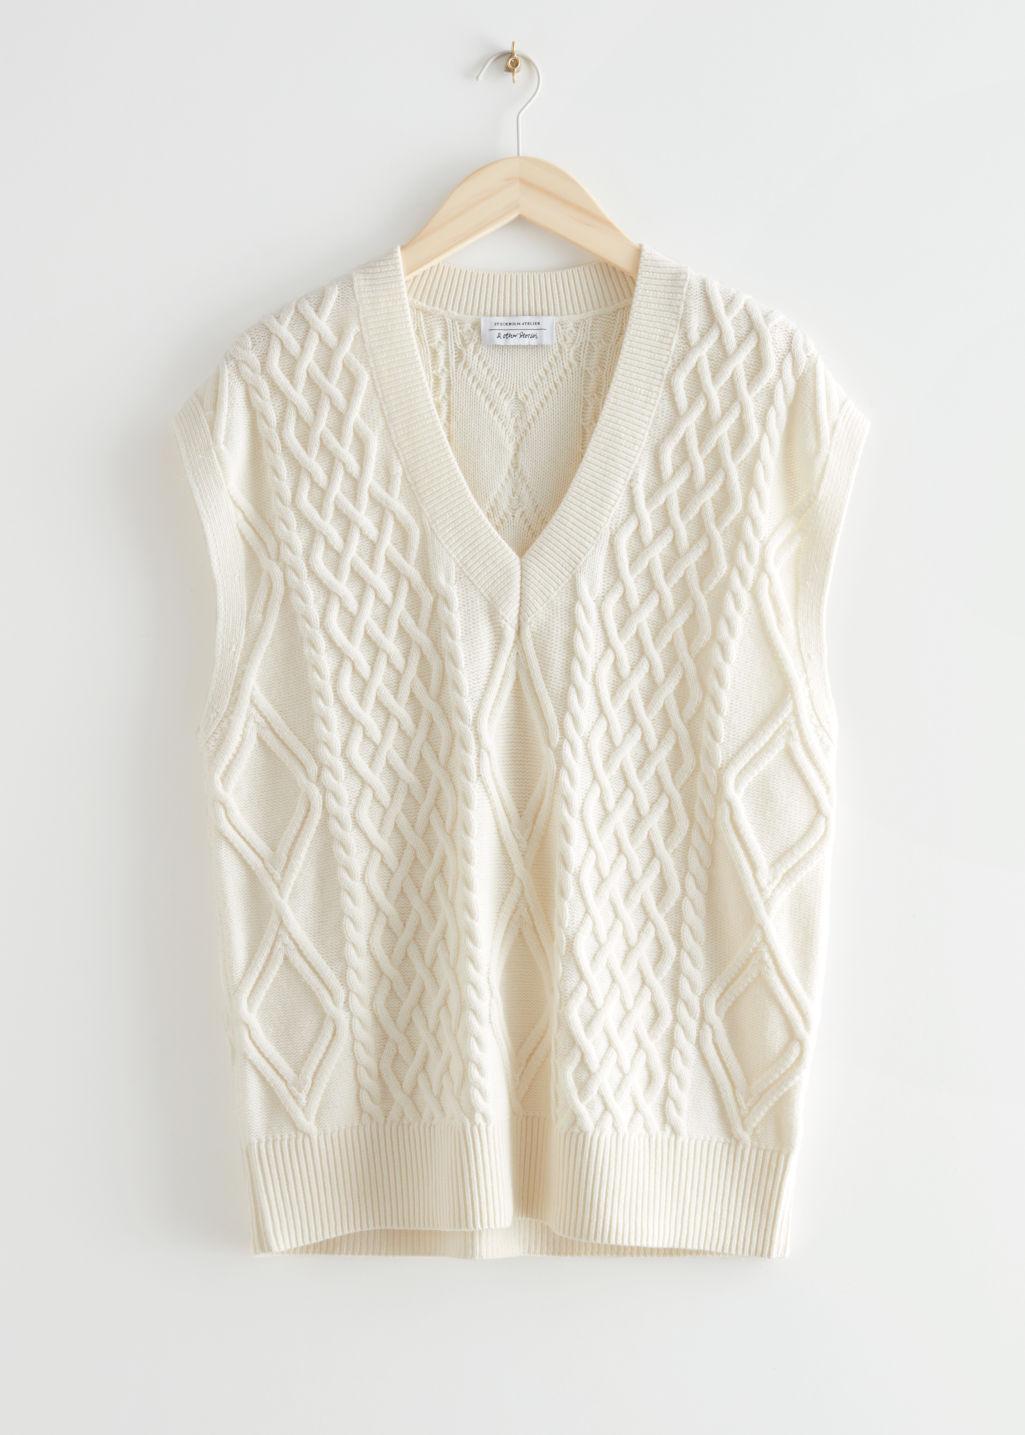 & Other Stories Oversized Cable Knit Vest in White | Lyst